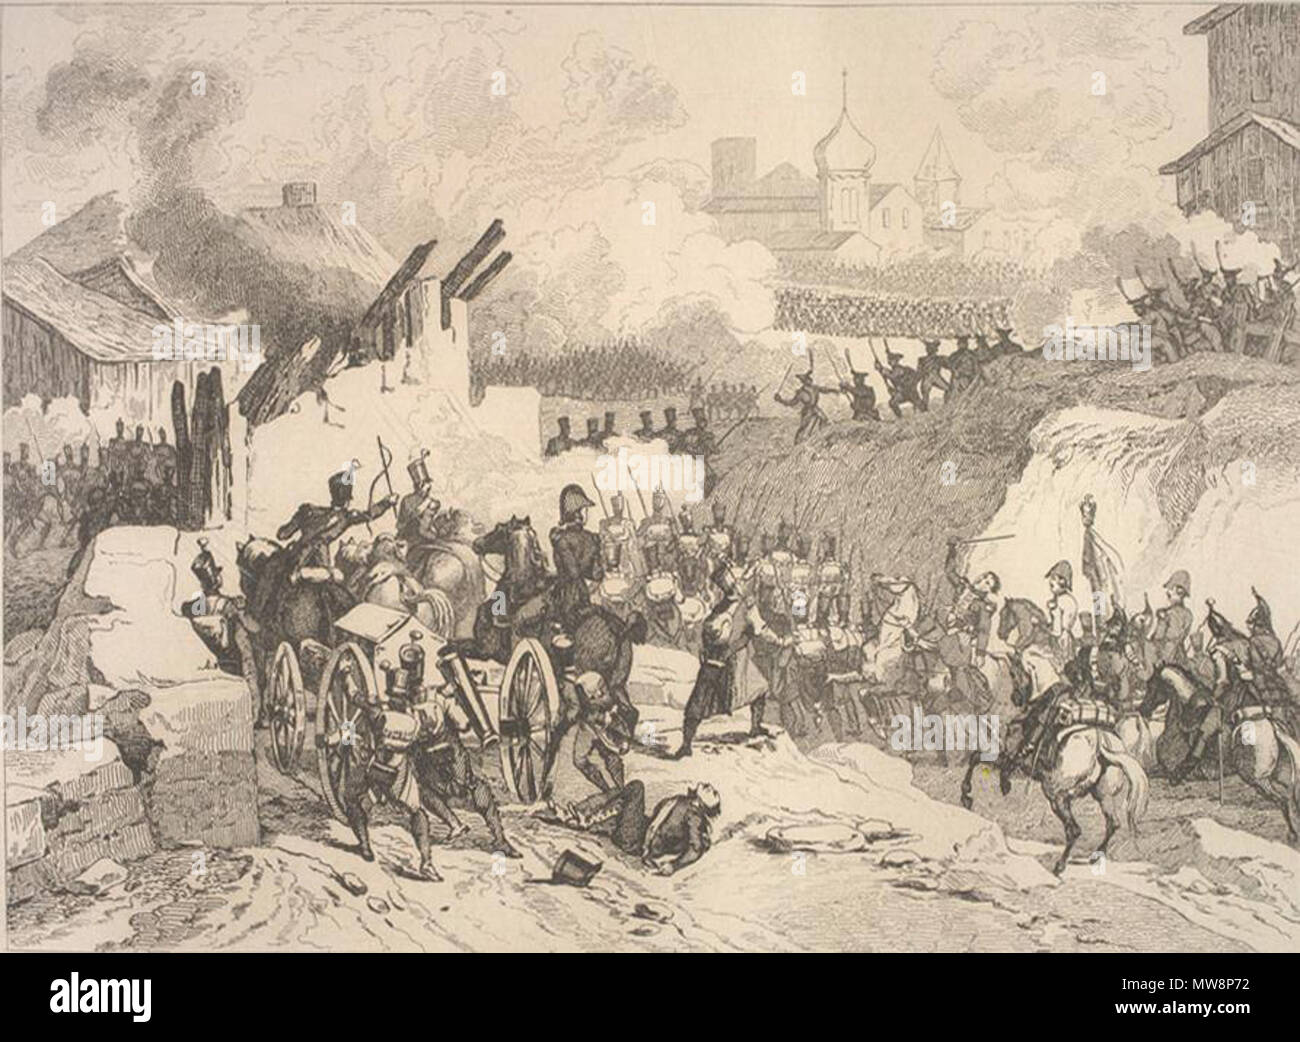 . Battle between Russian and French troops for Maloyaroslavets (Russia) on October, 24, part of the 1812 Napoleon Russian campaign. Title to drawing: Battle of Malo-jaroslawetz. [and] Death of General Delzons. From FRANCE MILITAIRE. // Martinet delt. // Réville sculpt // T. 19th century. artists: del. MARTINET, sc. RÉVILLE, Jean-Baptiste (1767-1825) 75 Battle of Maloyaroslavets 1812 by Martinet Stock Photo